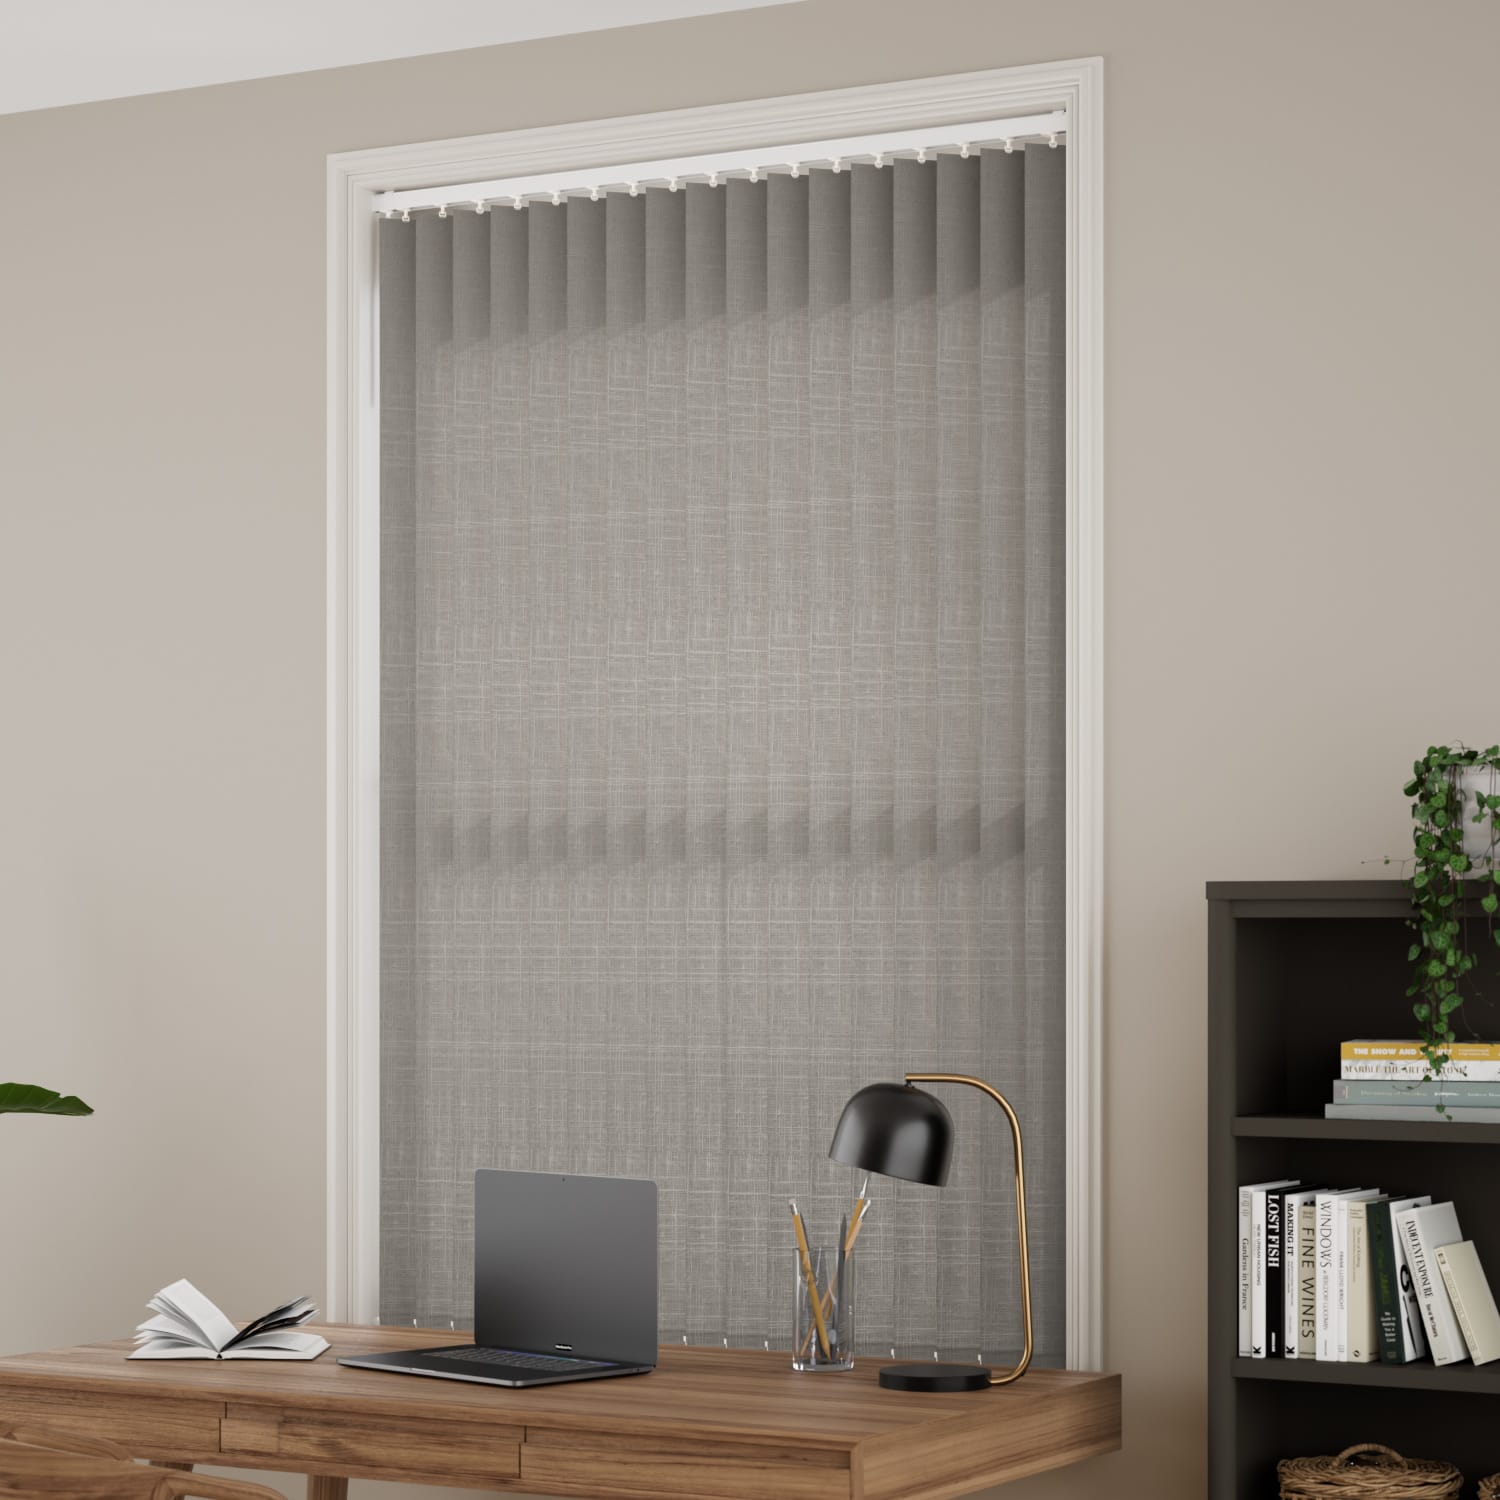 https://www.blinds-2go.ie/content/product-images/grazia-storm-grey-23-vertical-blind-a.jpg